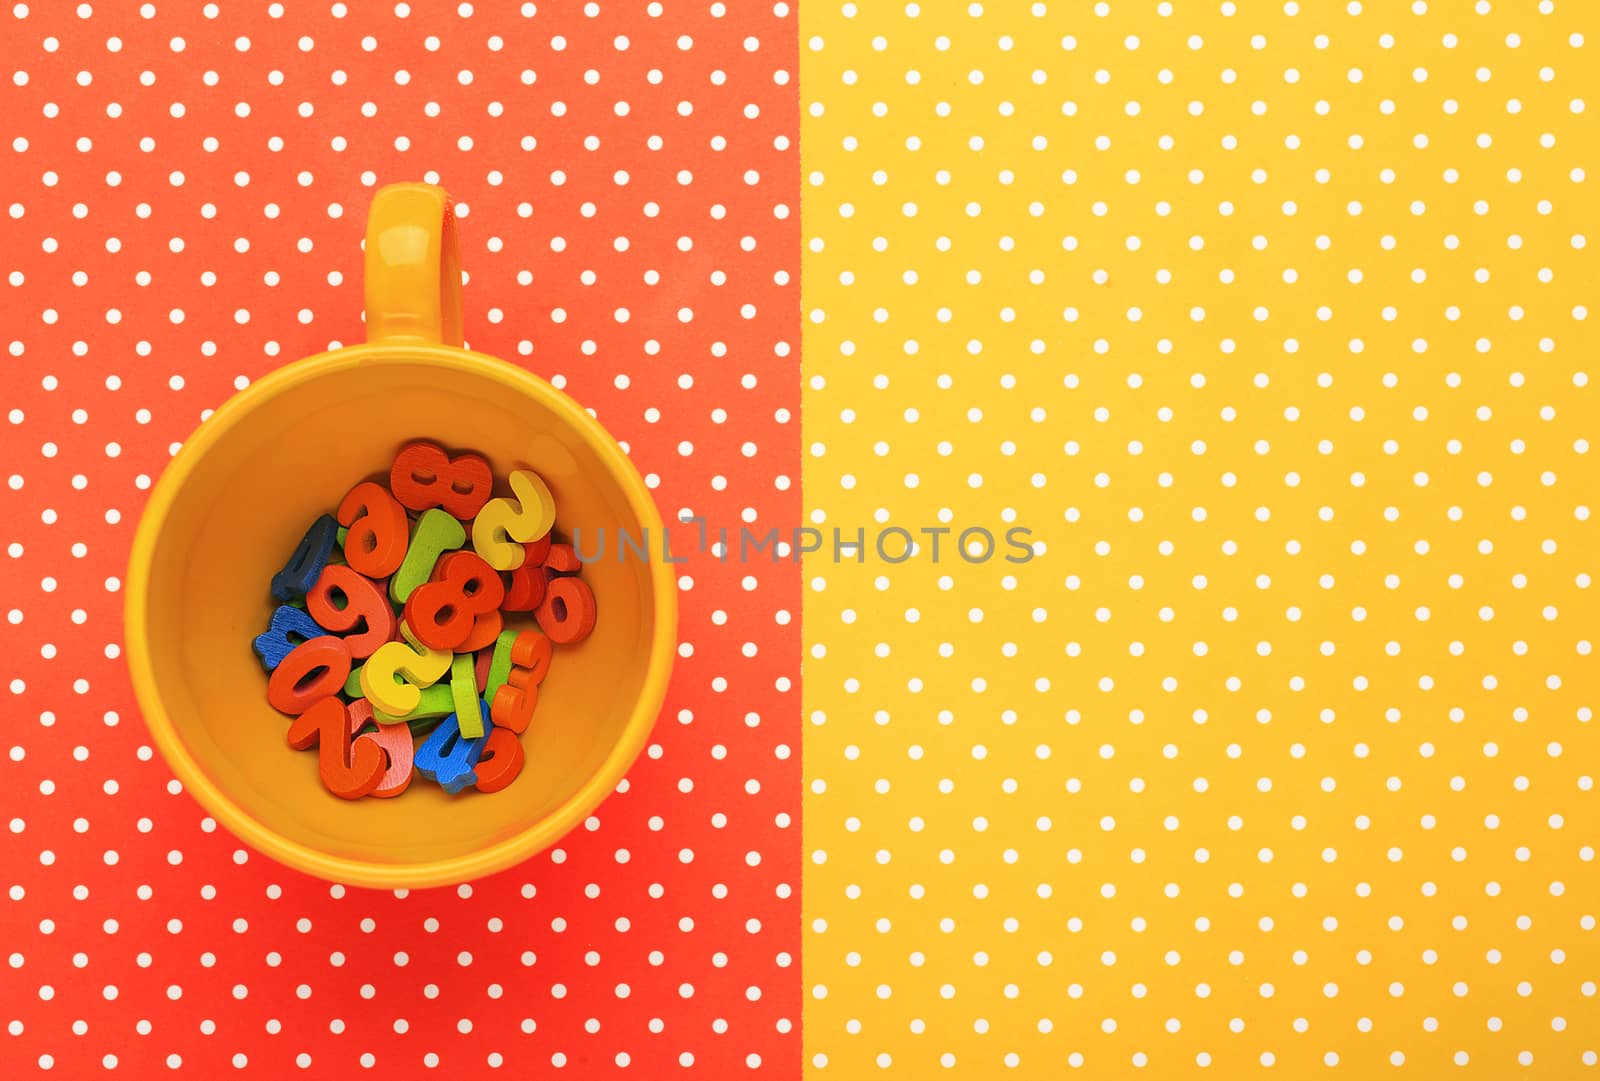 cup with colorful topped background